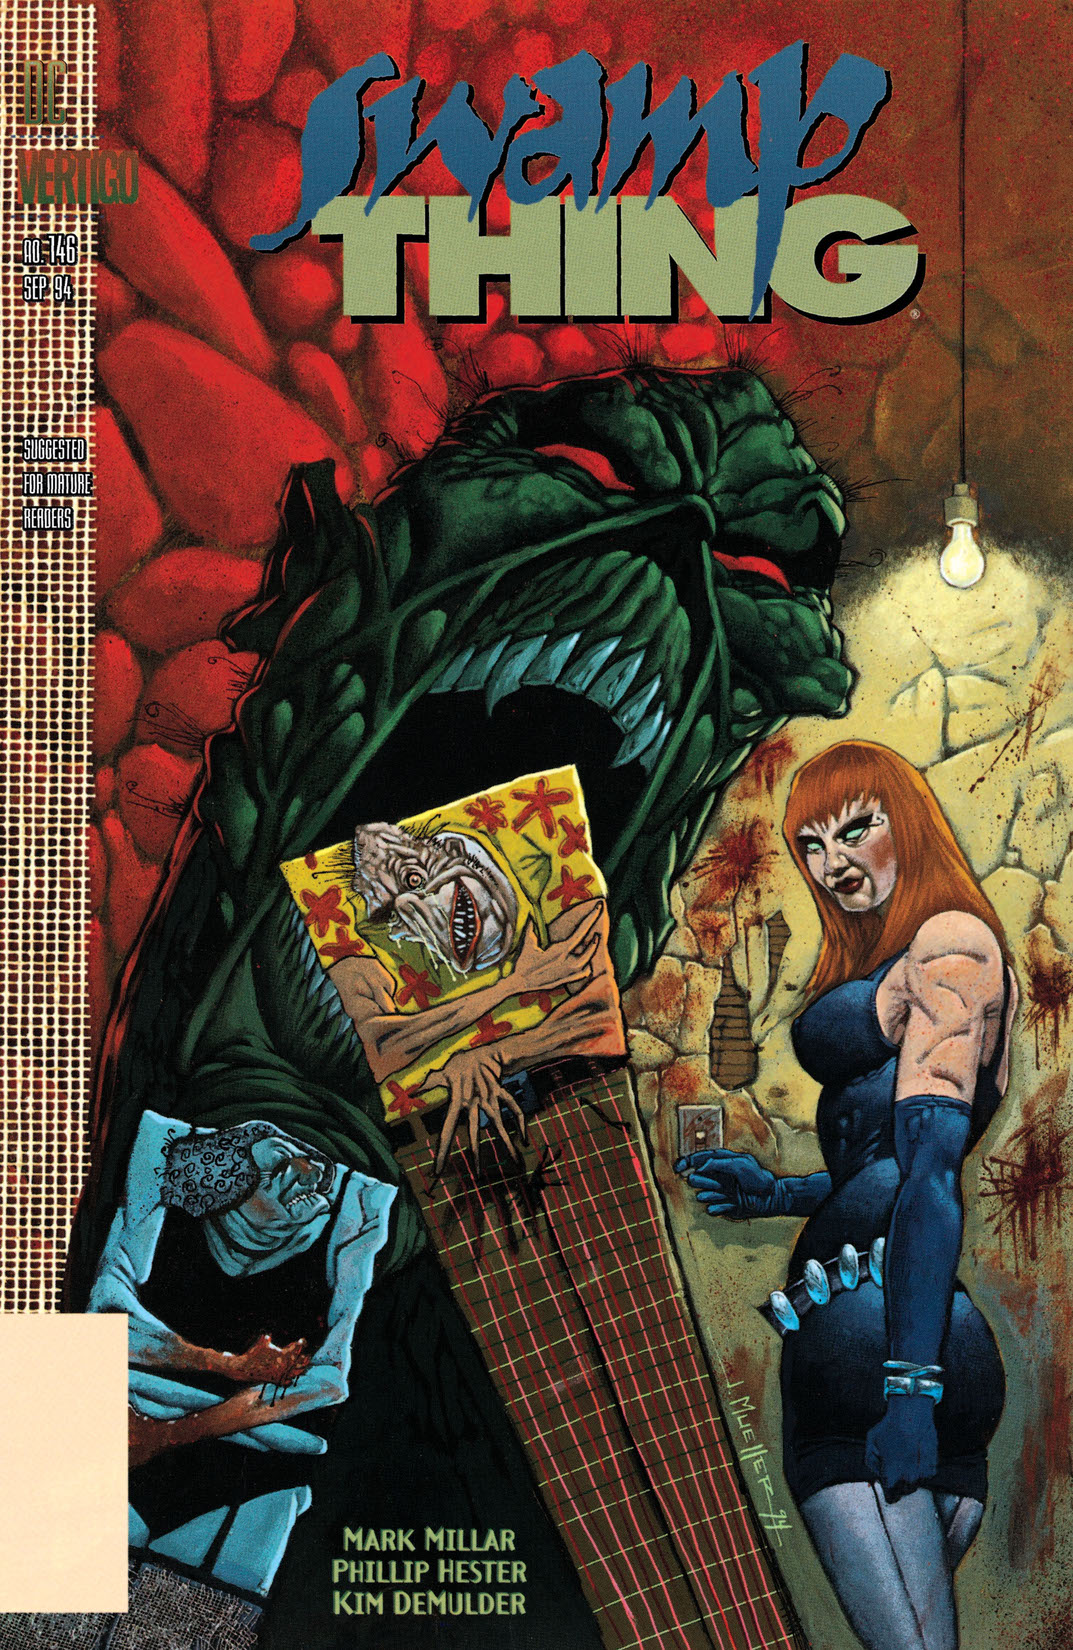 Swamp Thing (1985-) #146 preview images